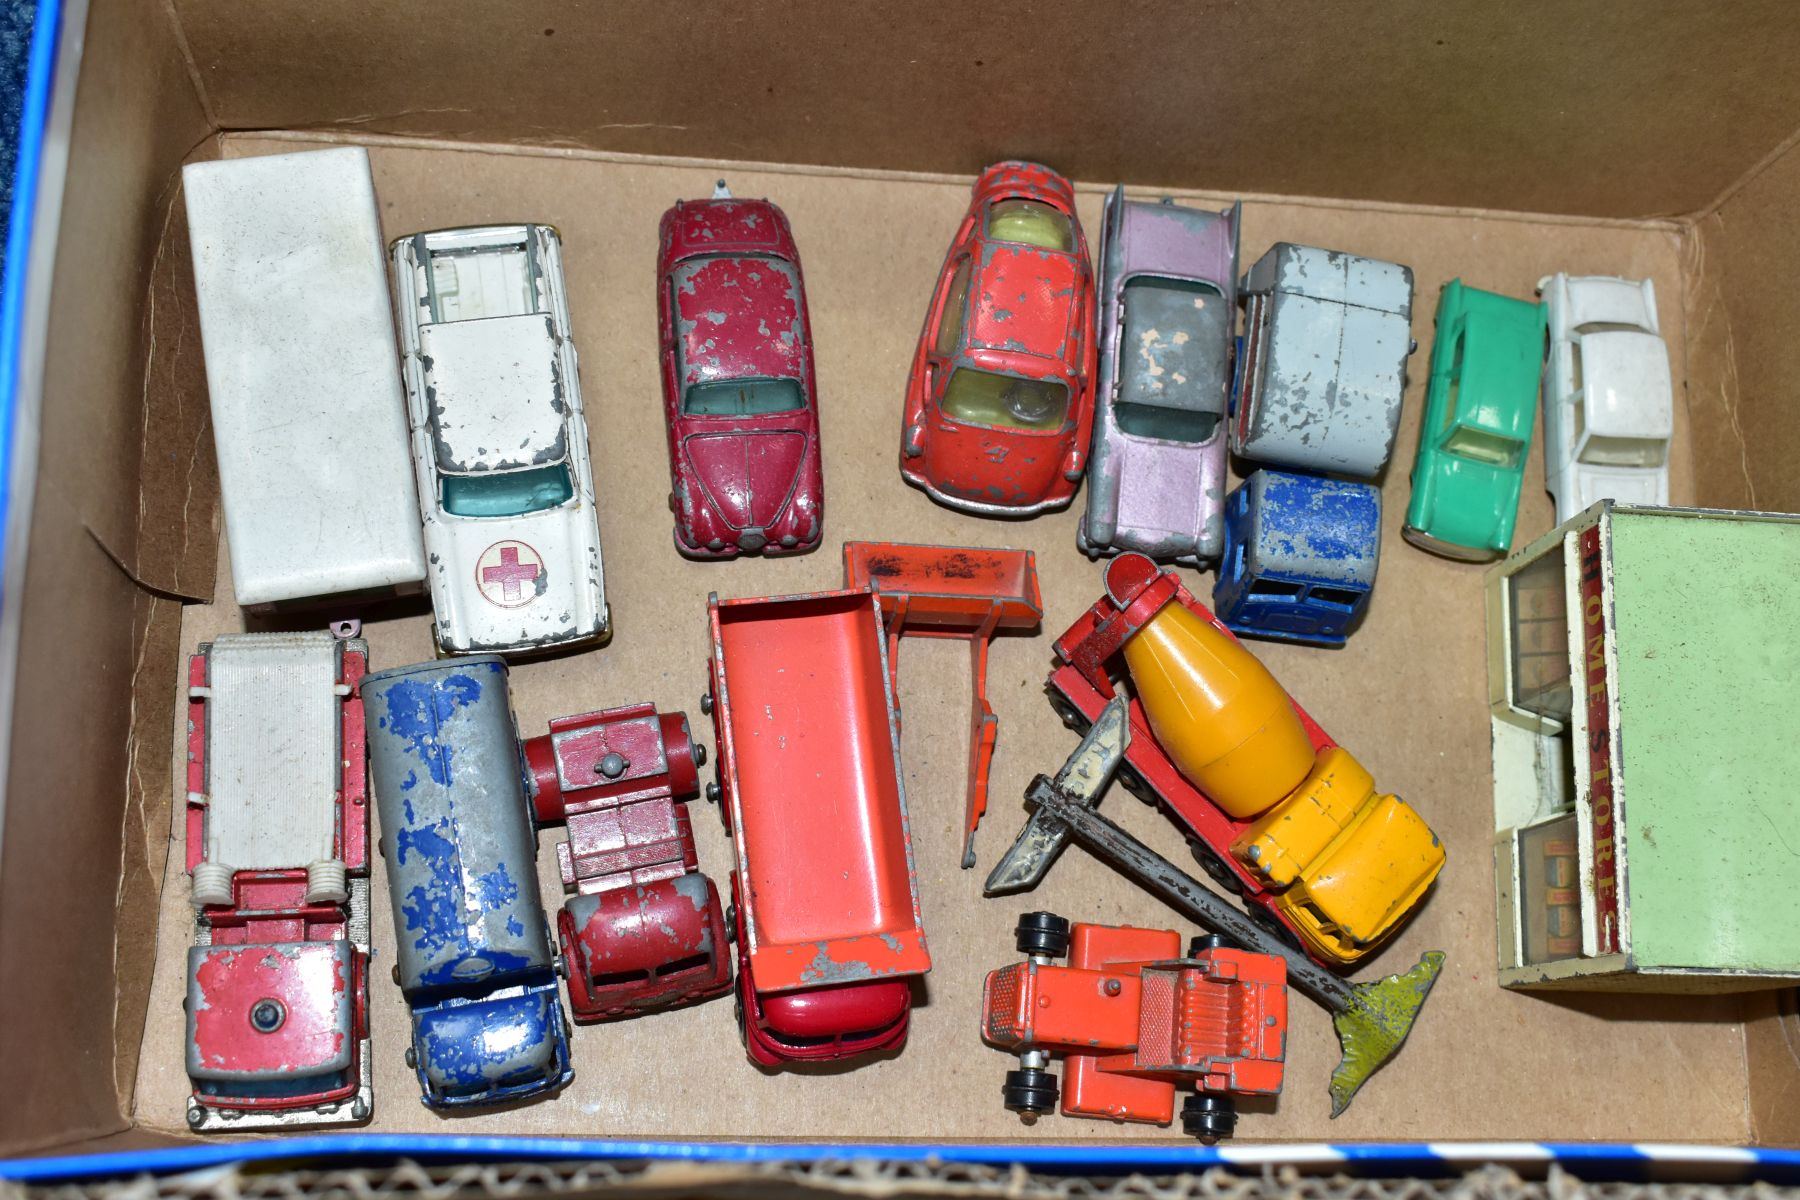 TWO BOXED SCALEXTRIC CARS, Ferrari 312 B2, No C025 and JPS Lotus, No C050, both appear complete - Image 2 of 8